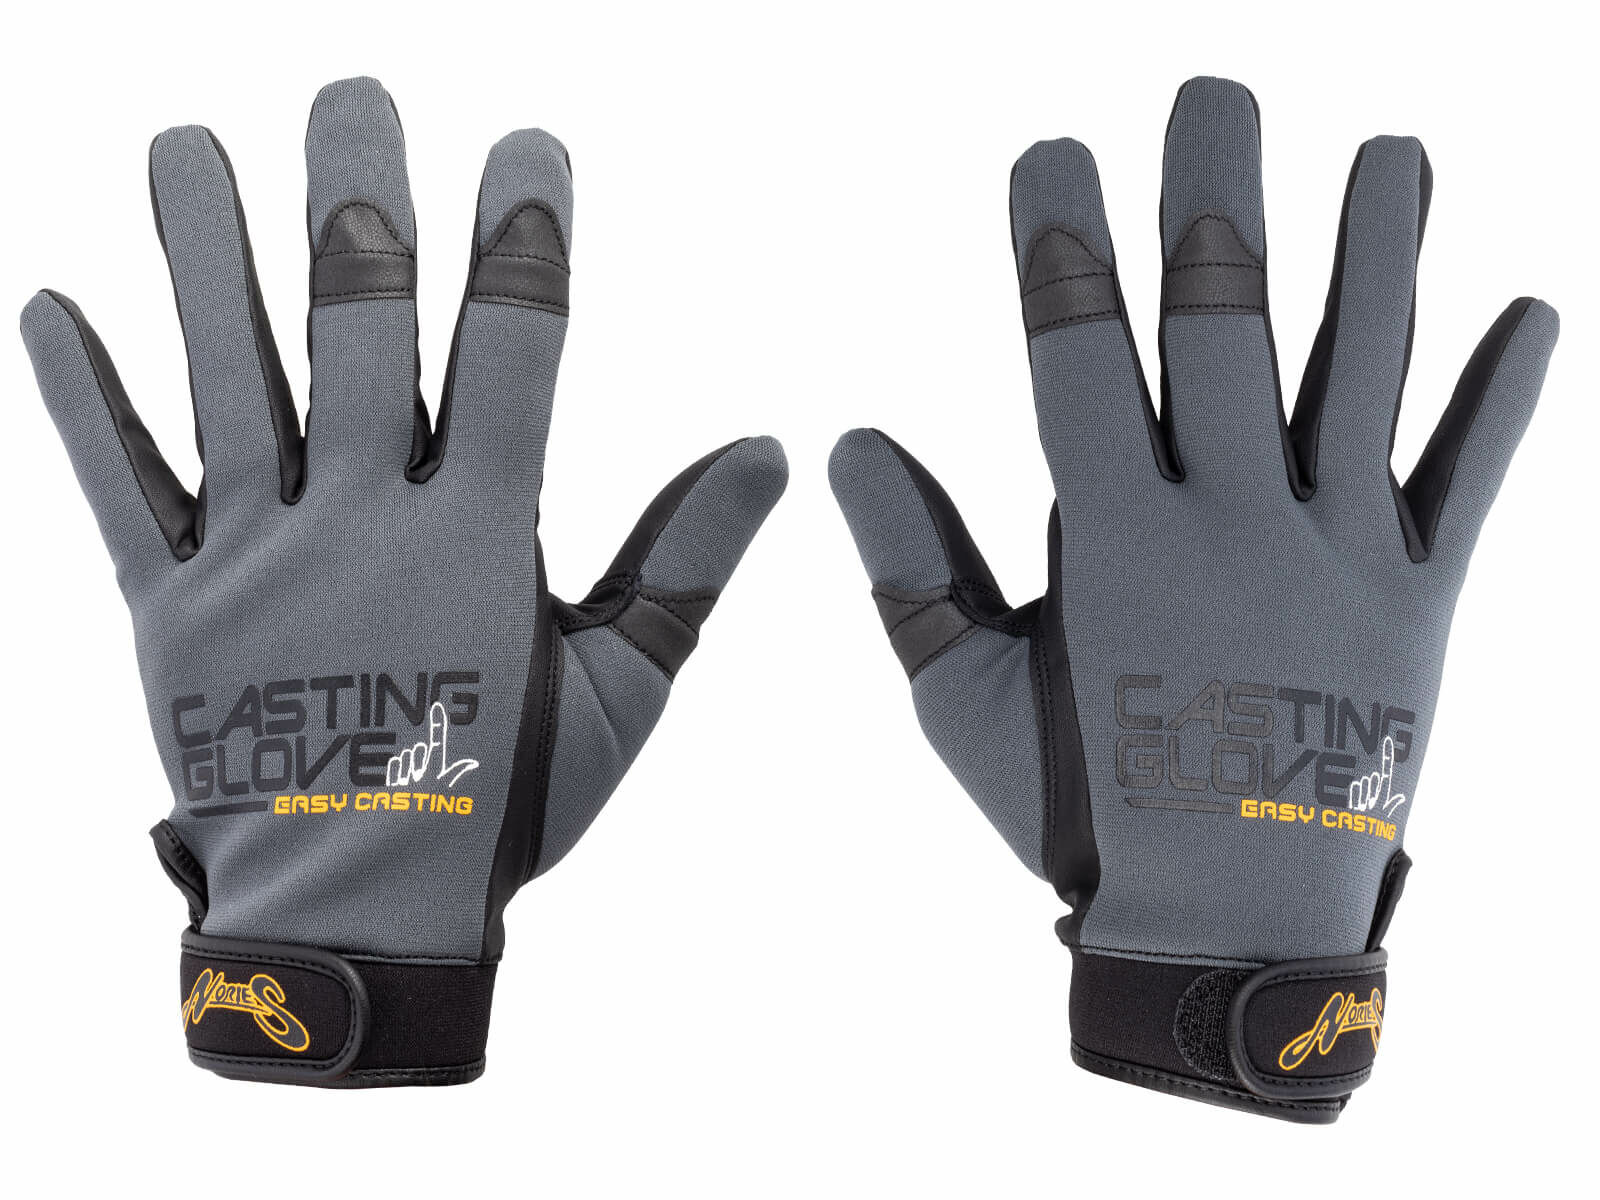 NORIES Casting Gloves NS-03 Gray Size M